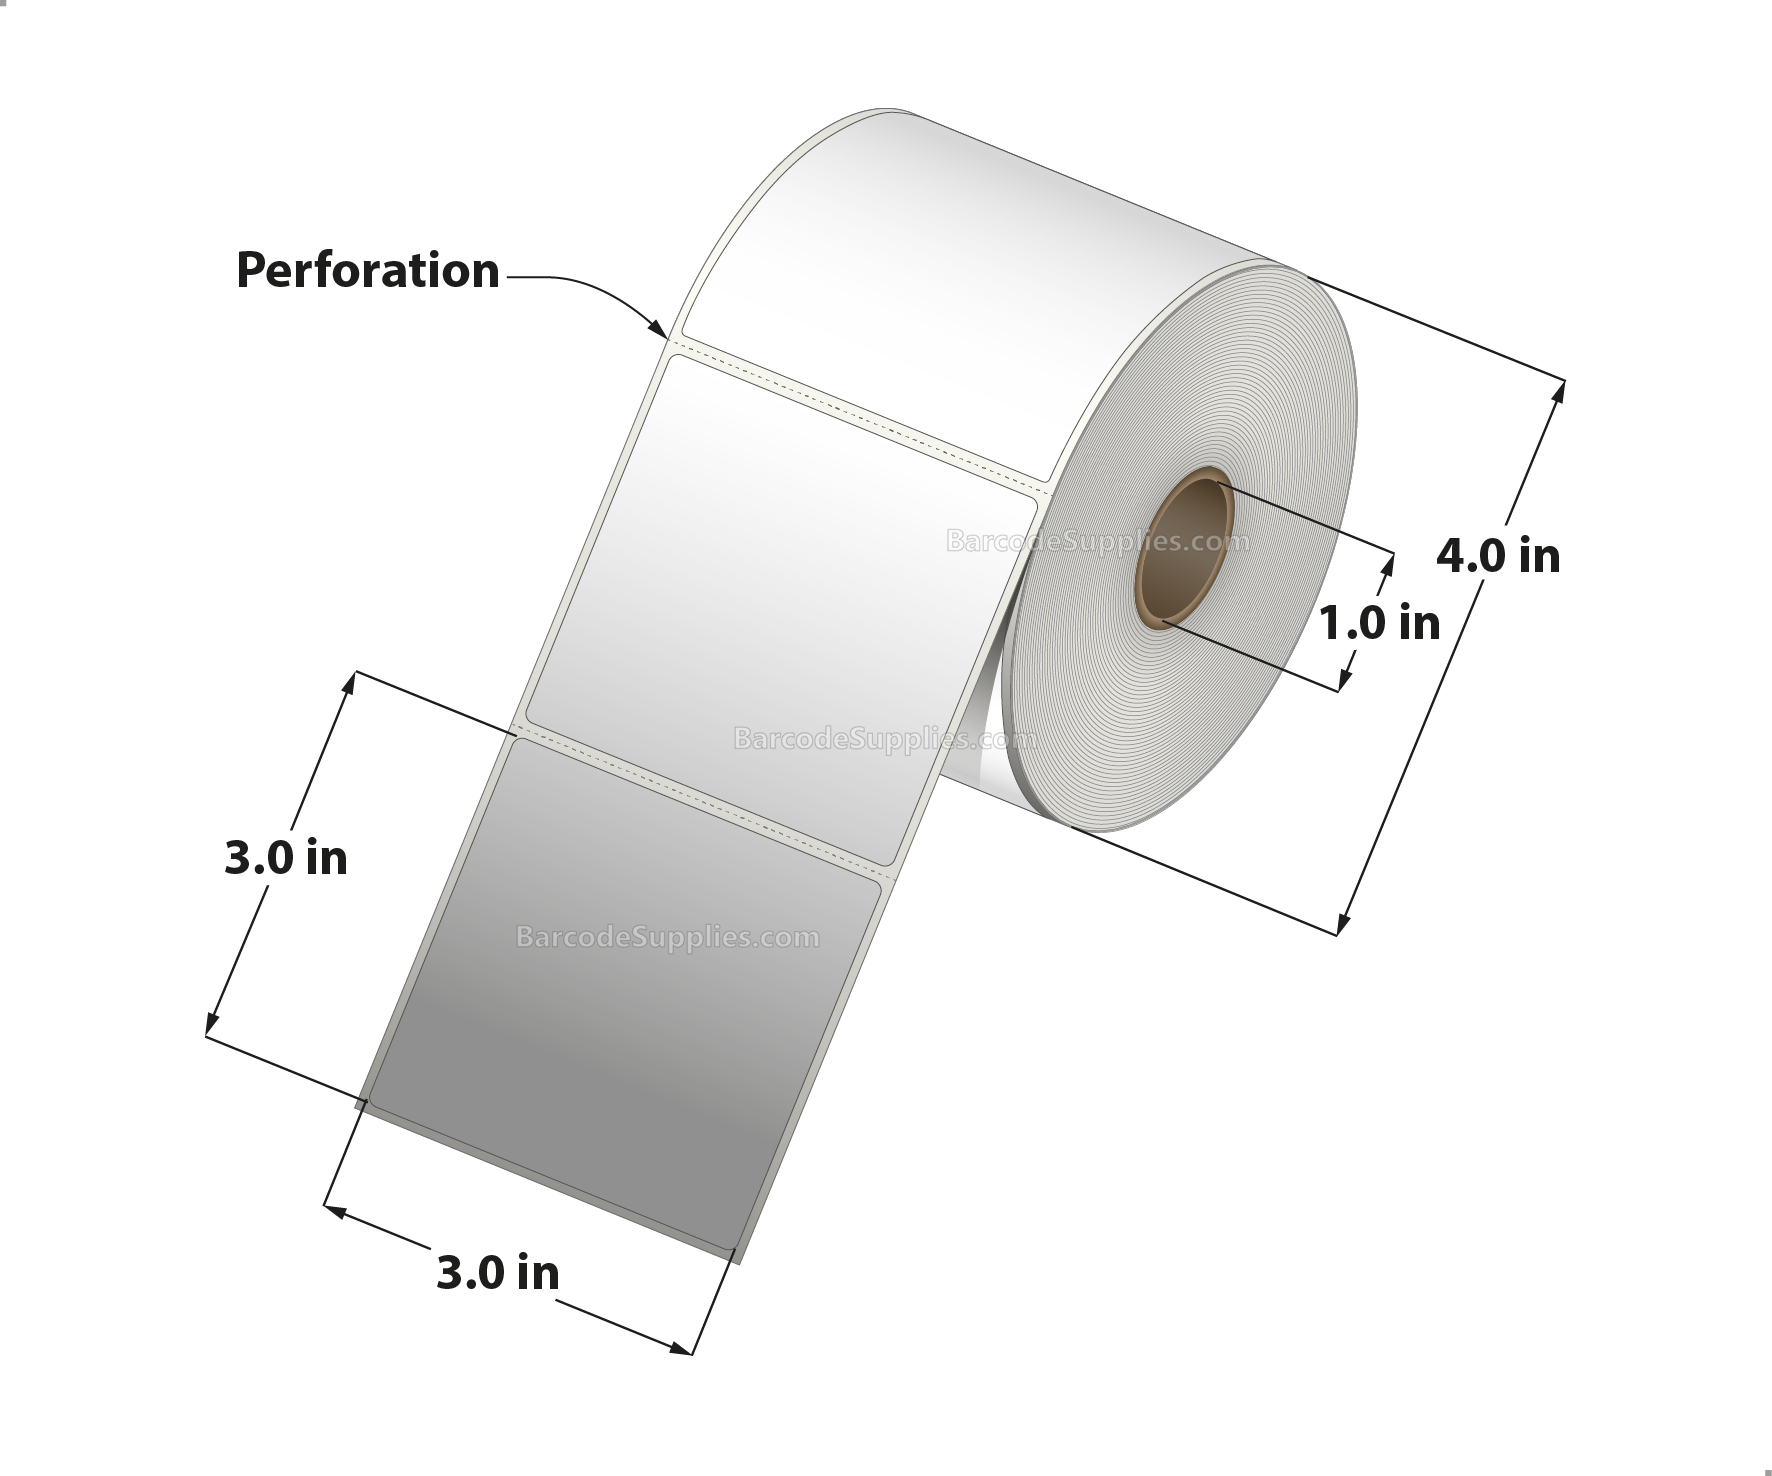 3 x 3 Thermal Transfer White Labels With Permanent Acrylic Adhesive - Perforated - 500 Labels Per Roll - Carton Of 4 Rolls - 2000 Labels Total - MPN: TH33-14PTT